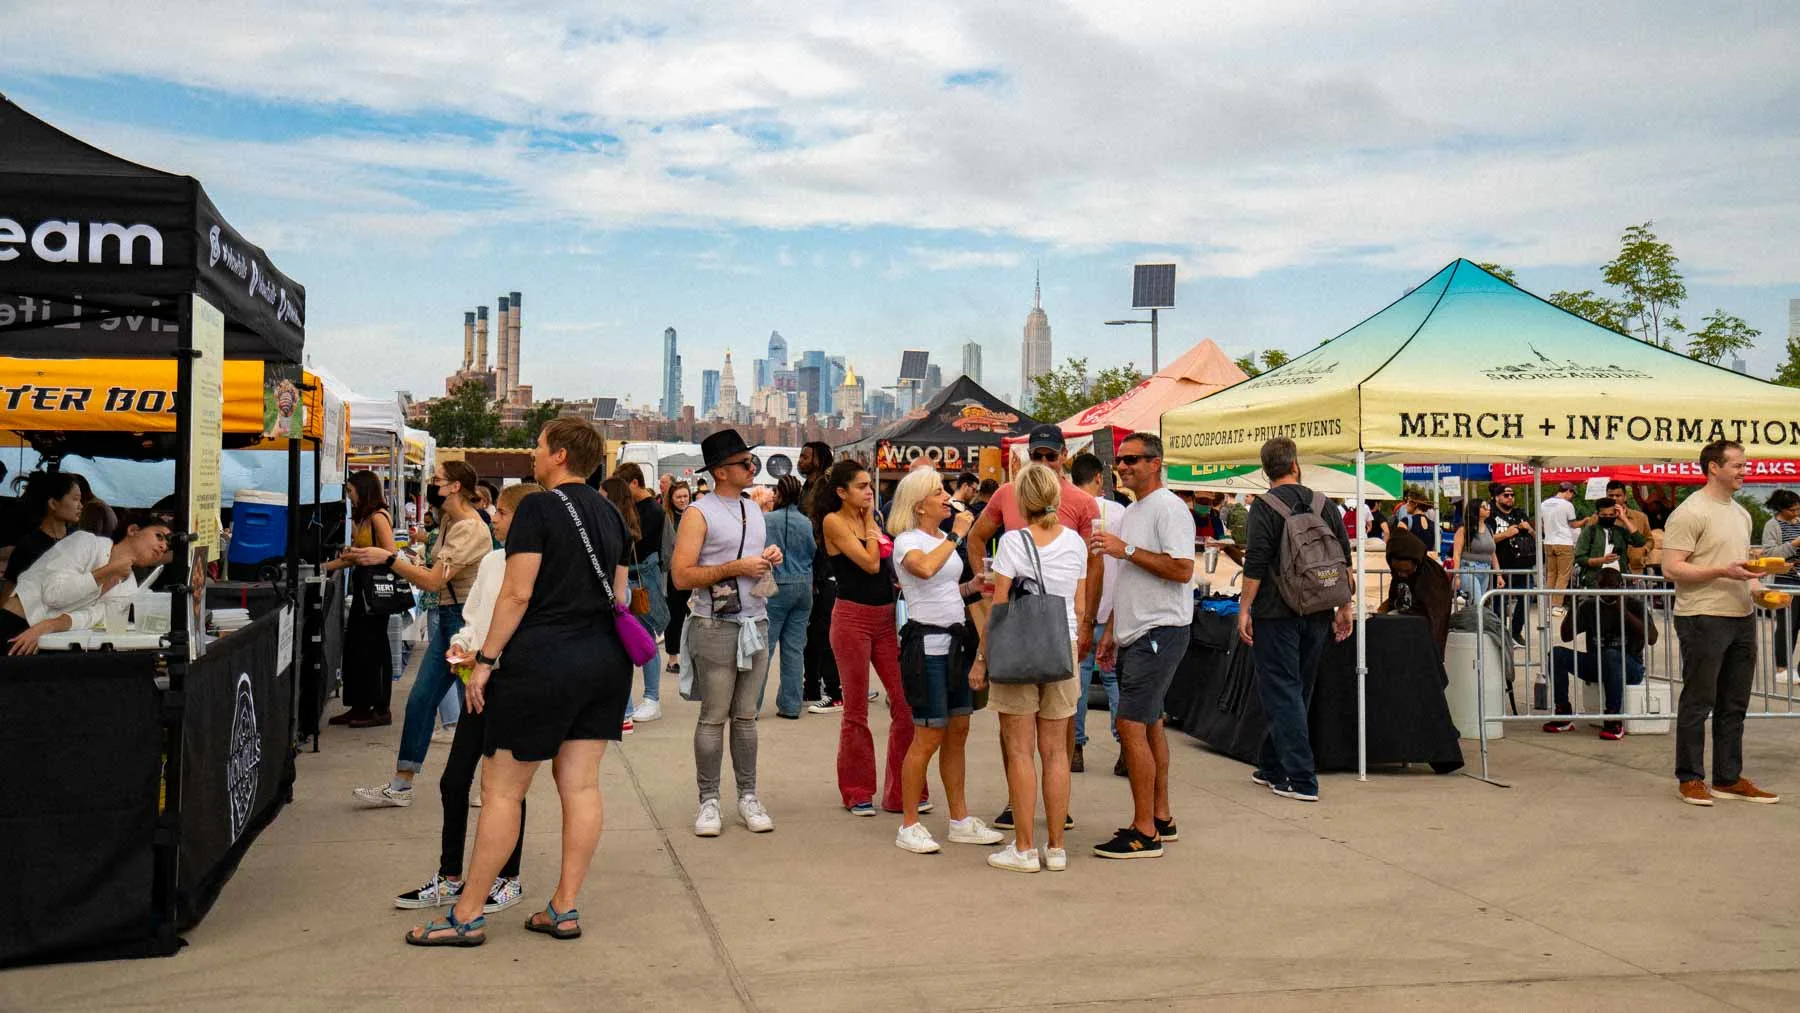 Smorgasburg
August in NYC